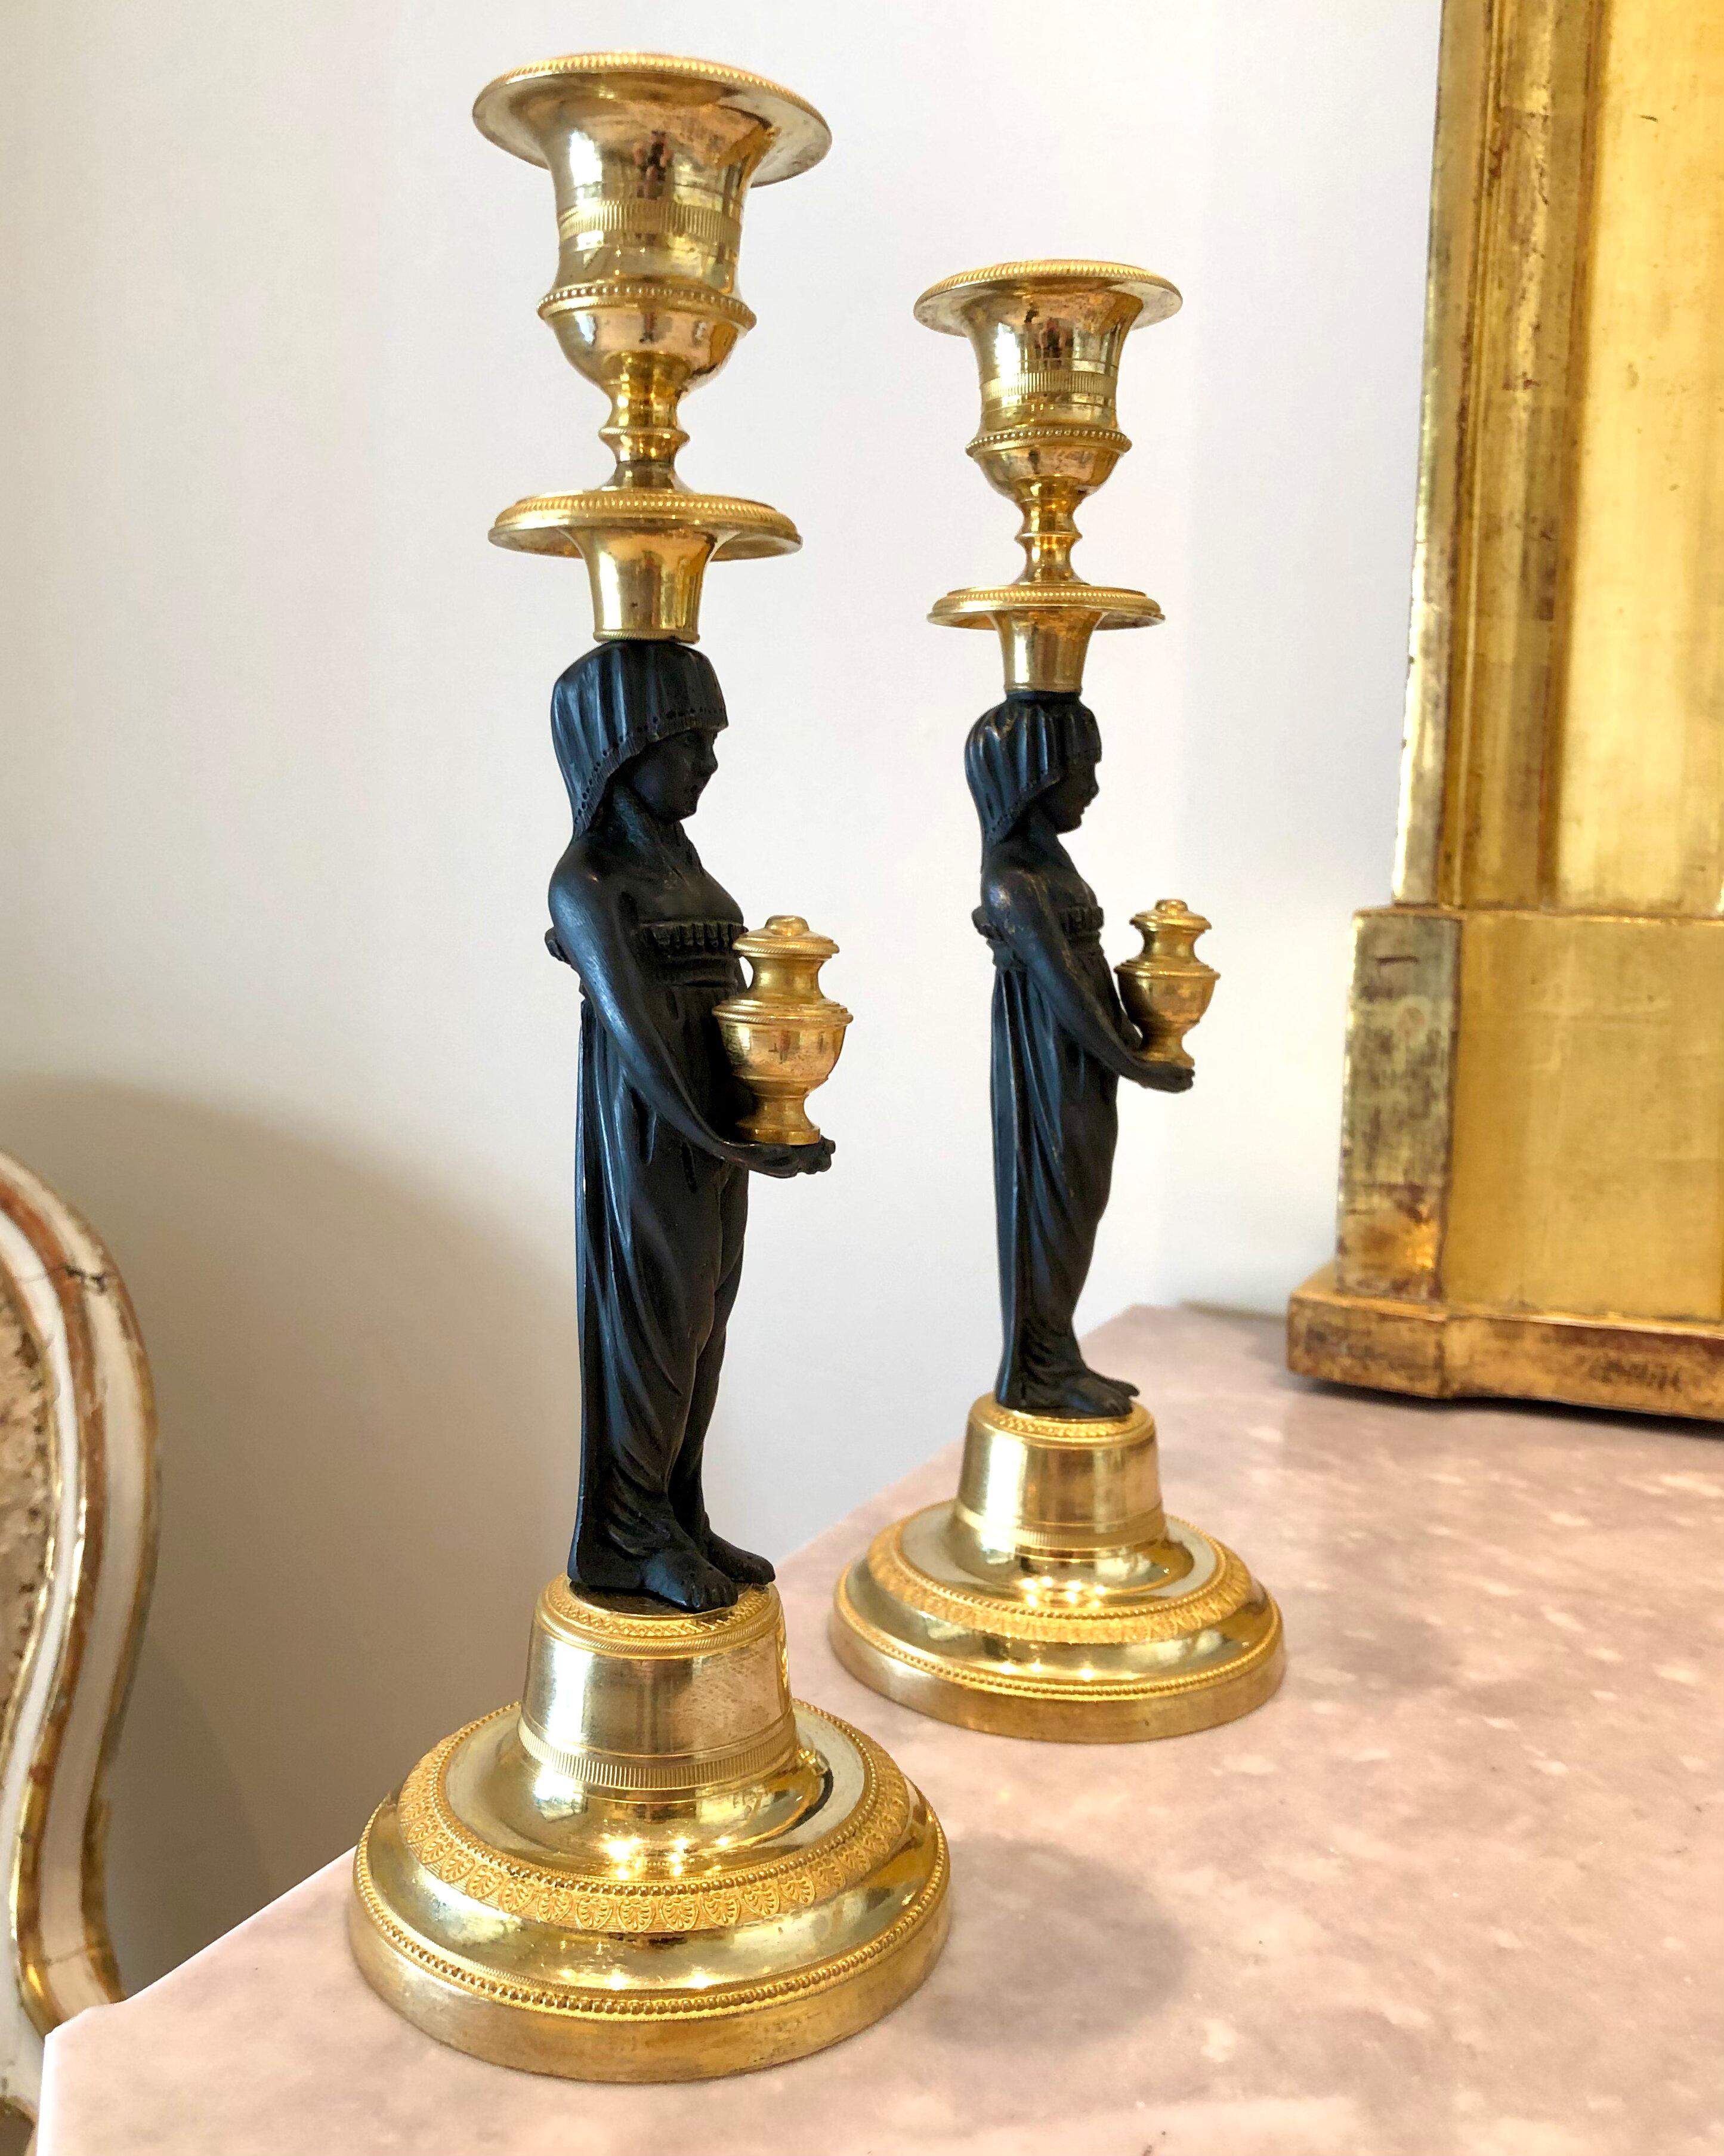 A very rare and excellent pair of ormolu and patinated bronze candlesticks, with the representation of a caryatid vestal virgin wearing a classic tunic and holding golden oil jars between the arms.
In ancient Rome, the Vestal Virgins were